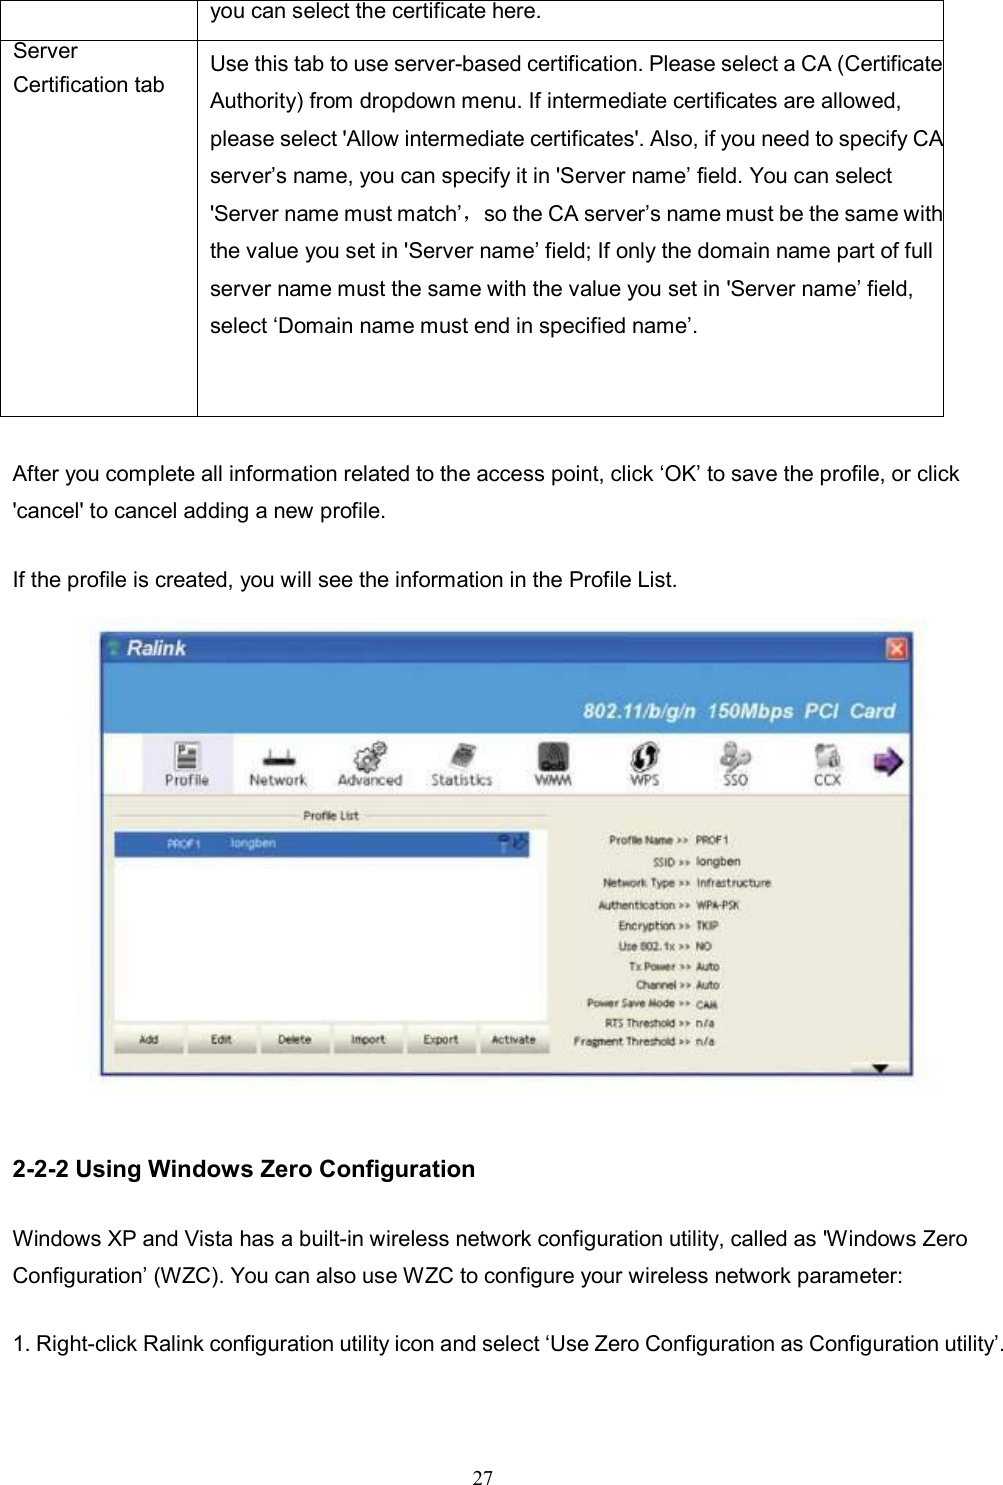 27   After you complete all information related to the access point, click ‘OK’ to save the profile, or click &apos;cancel&apos; to cancel adding a new profile. If the profile is created, you will see the information in the Profile List.  2-2-2 Using Windows Zero Configuration Windows XP and Vista has a built-in wireless network configuration utility, called as &apos;Windows Zero Configuration’ (WZC). You can also use WZC to configure your wireless network parameter: 1. Right-click Ralink configuration utility icon and select ‘Use Zero Configuration as Configuration utility’. you can select the certificate here. Server Certification tab Use this tab to use server-based certification. Please select a CA (Certificate Authority) from dropdown menu. If intermediate certificates are allowed, please select &apos;Allow intermediate certificates&apos;. Also, if you need to specify CA server’s name, you can specify it in &apos;Server name’ field. You can select &apos;Server name must match’，so the CA server’s name must be the same with the value you set in &apos;Server name’ field; If only the domain name part of full server name must the same with the value you set in &apos;Server name’ field, select ‘Domain name must end in specified name’.  